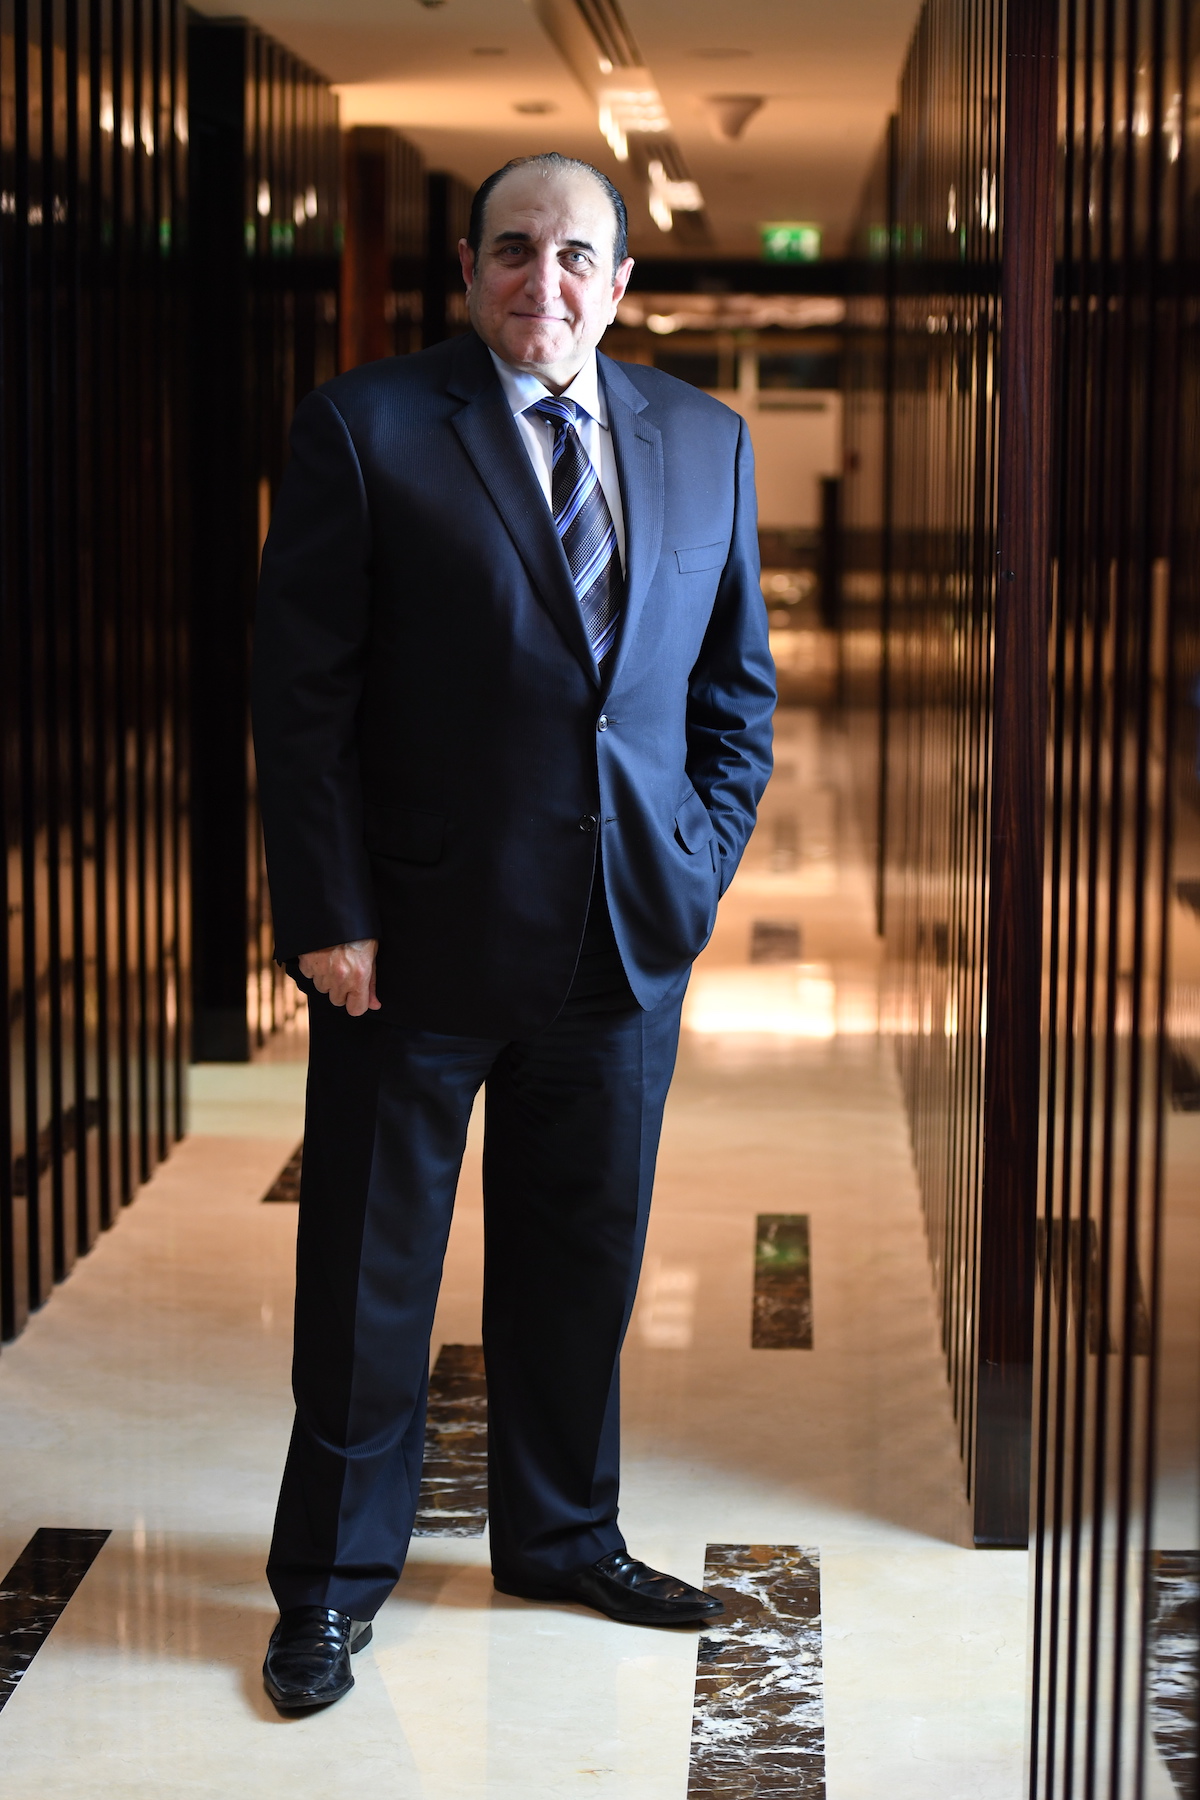 Osman Sultan, CEO of Emirates Integrated Telecommunications Company